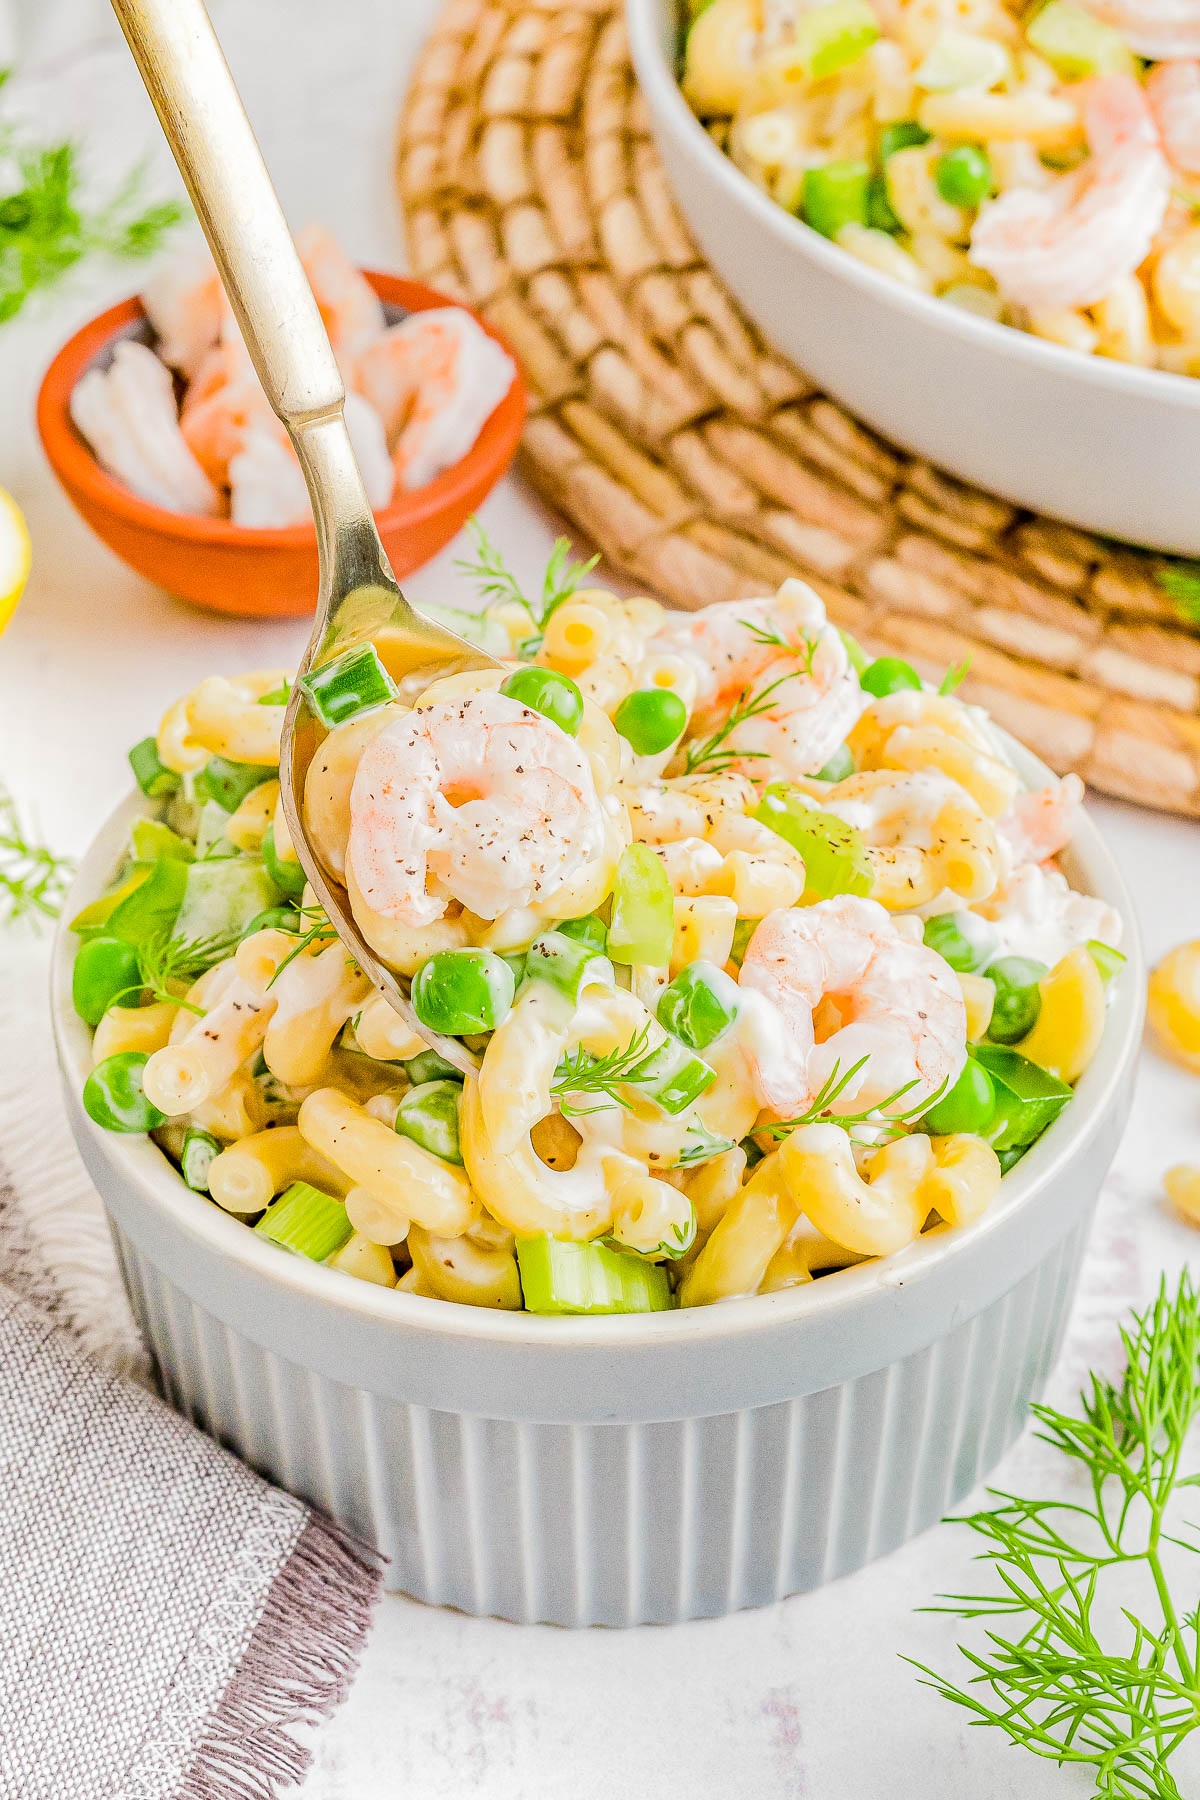 A bowl of creamy shrimp pasta salad garnished with fresh dill and peas, served on a light table with crackers in the background.